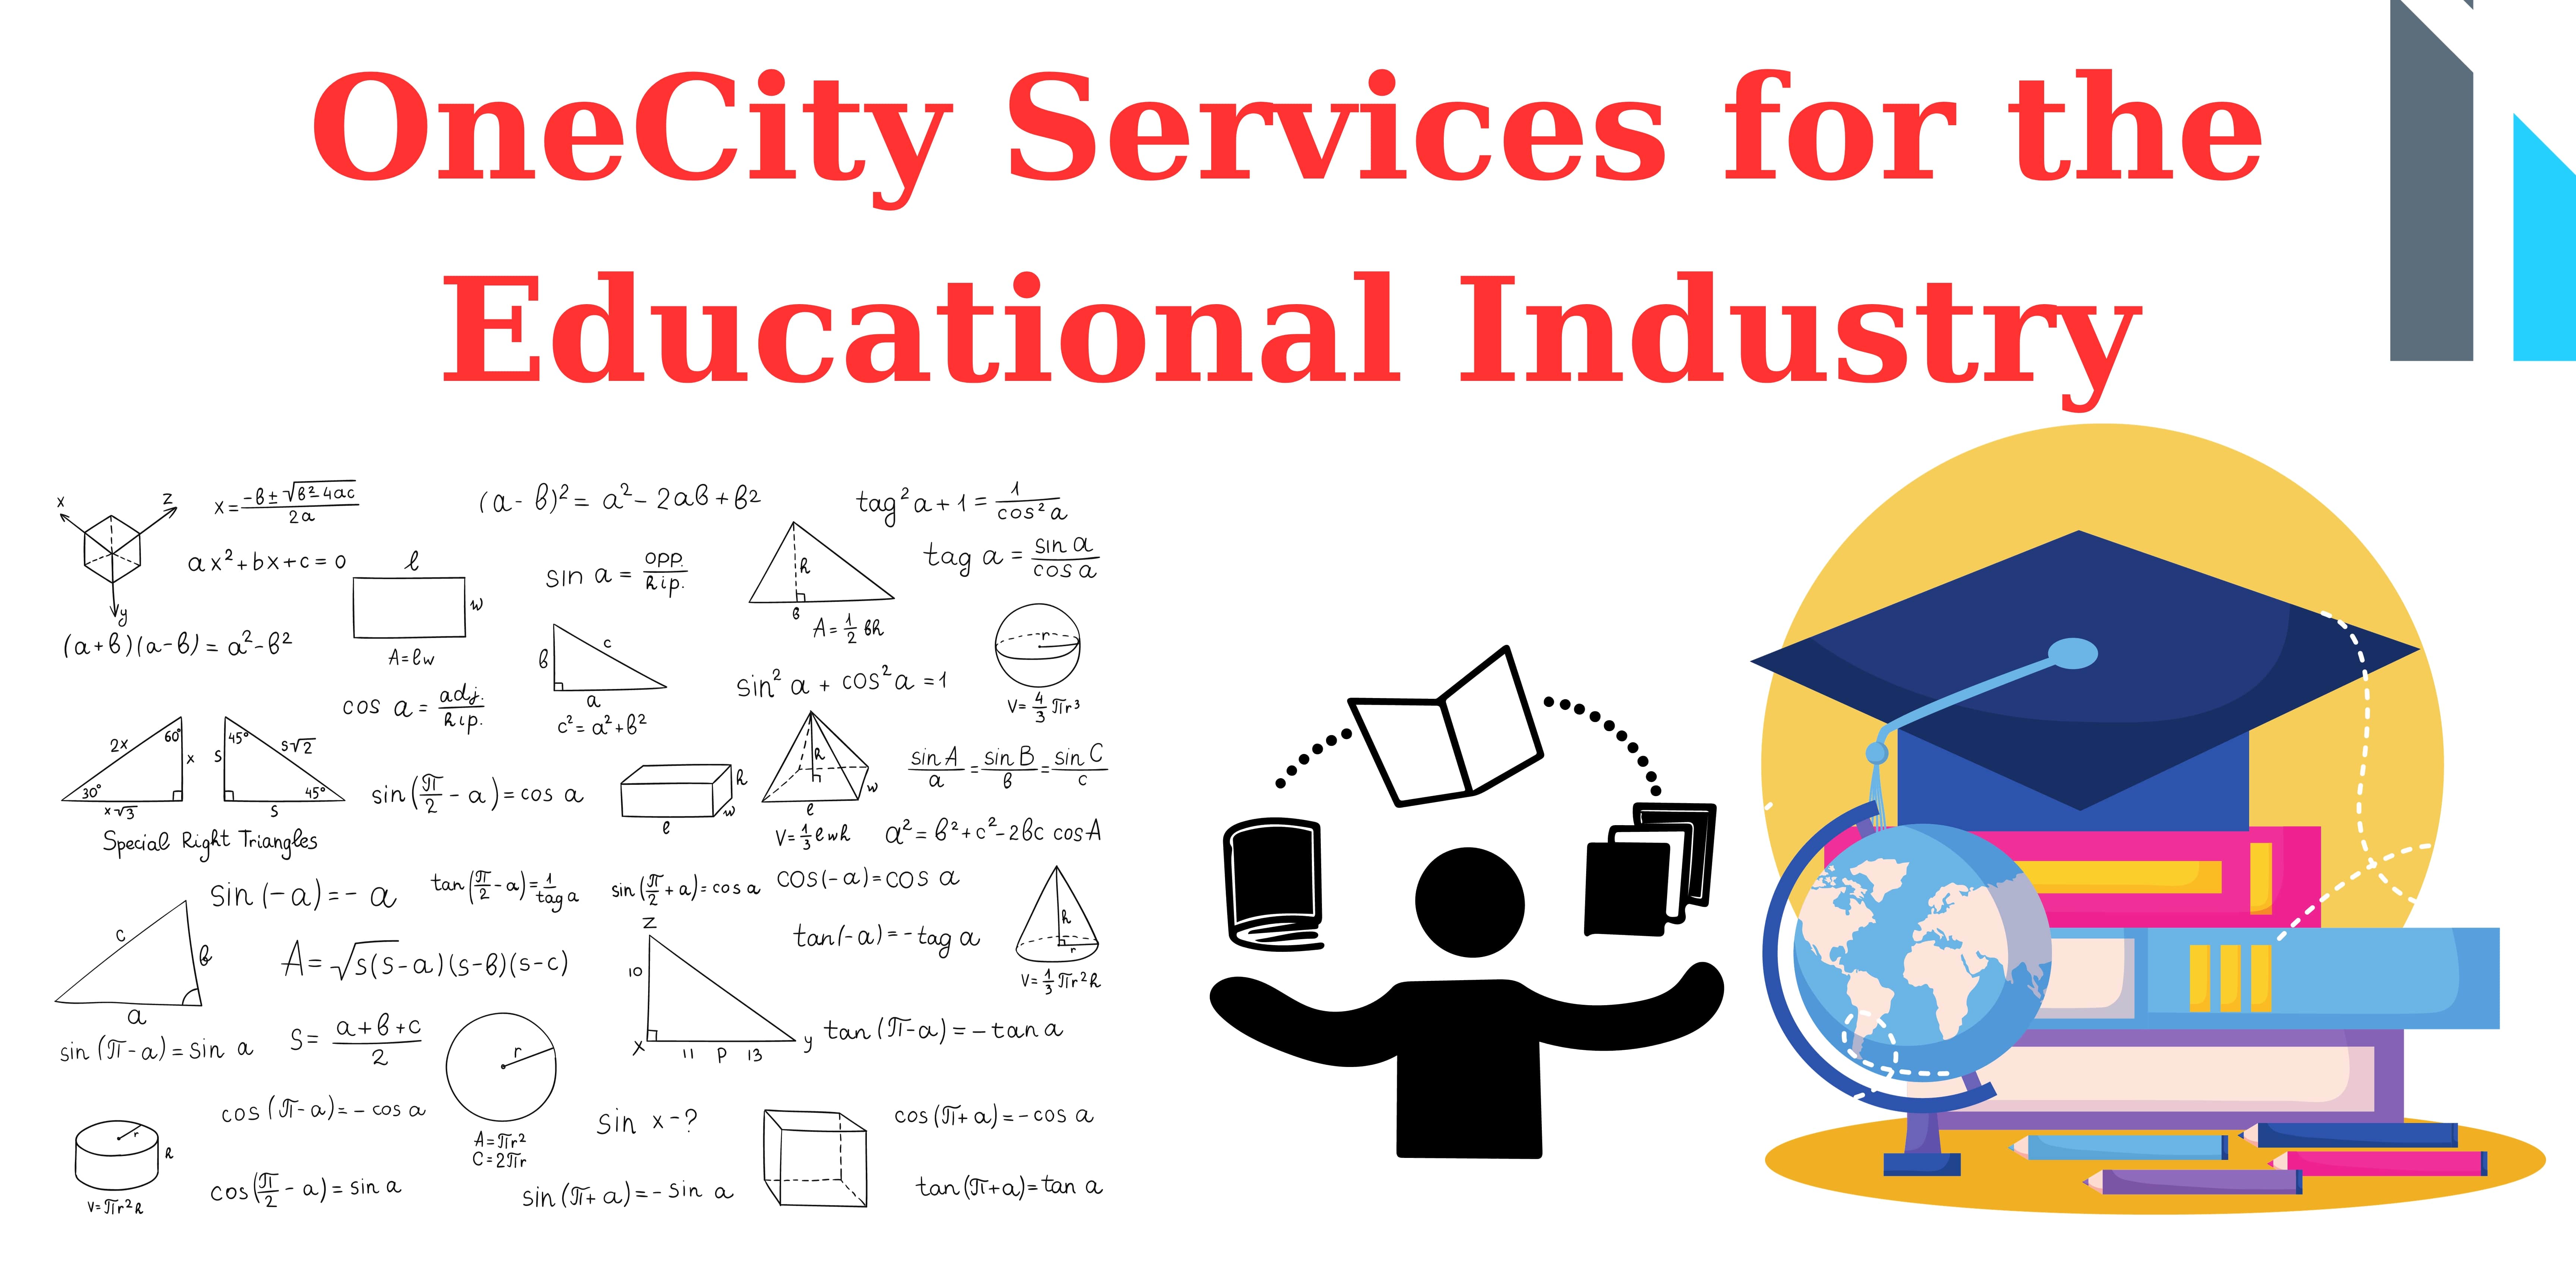 OneCity Services for the Educational Industry